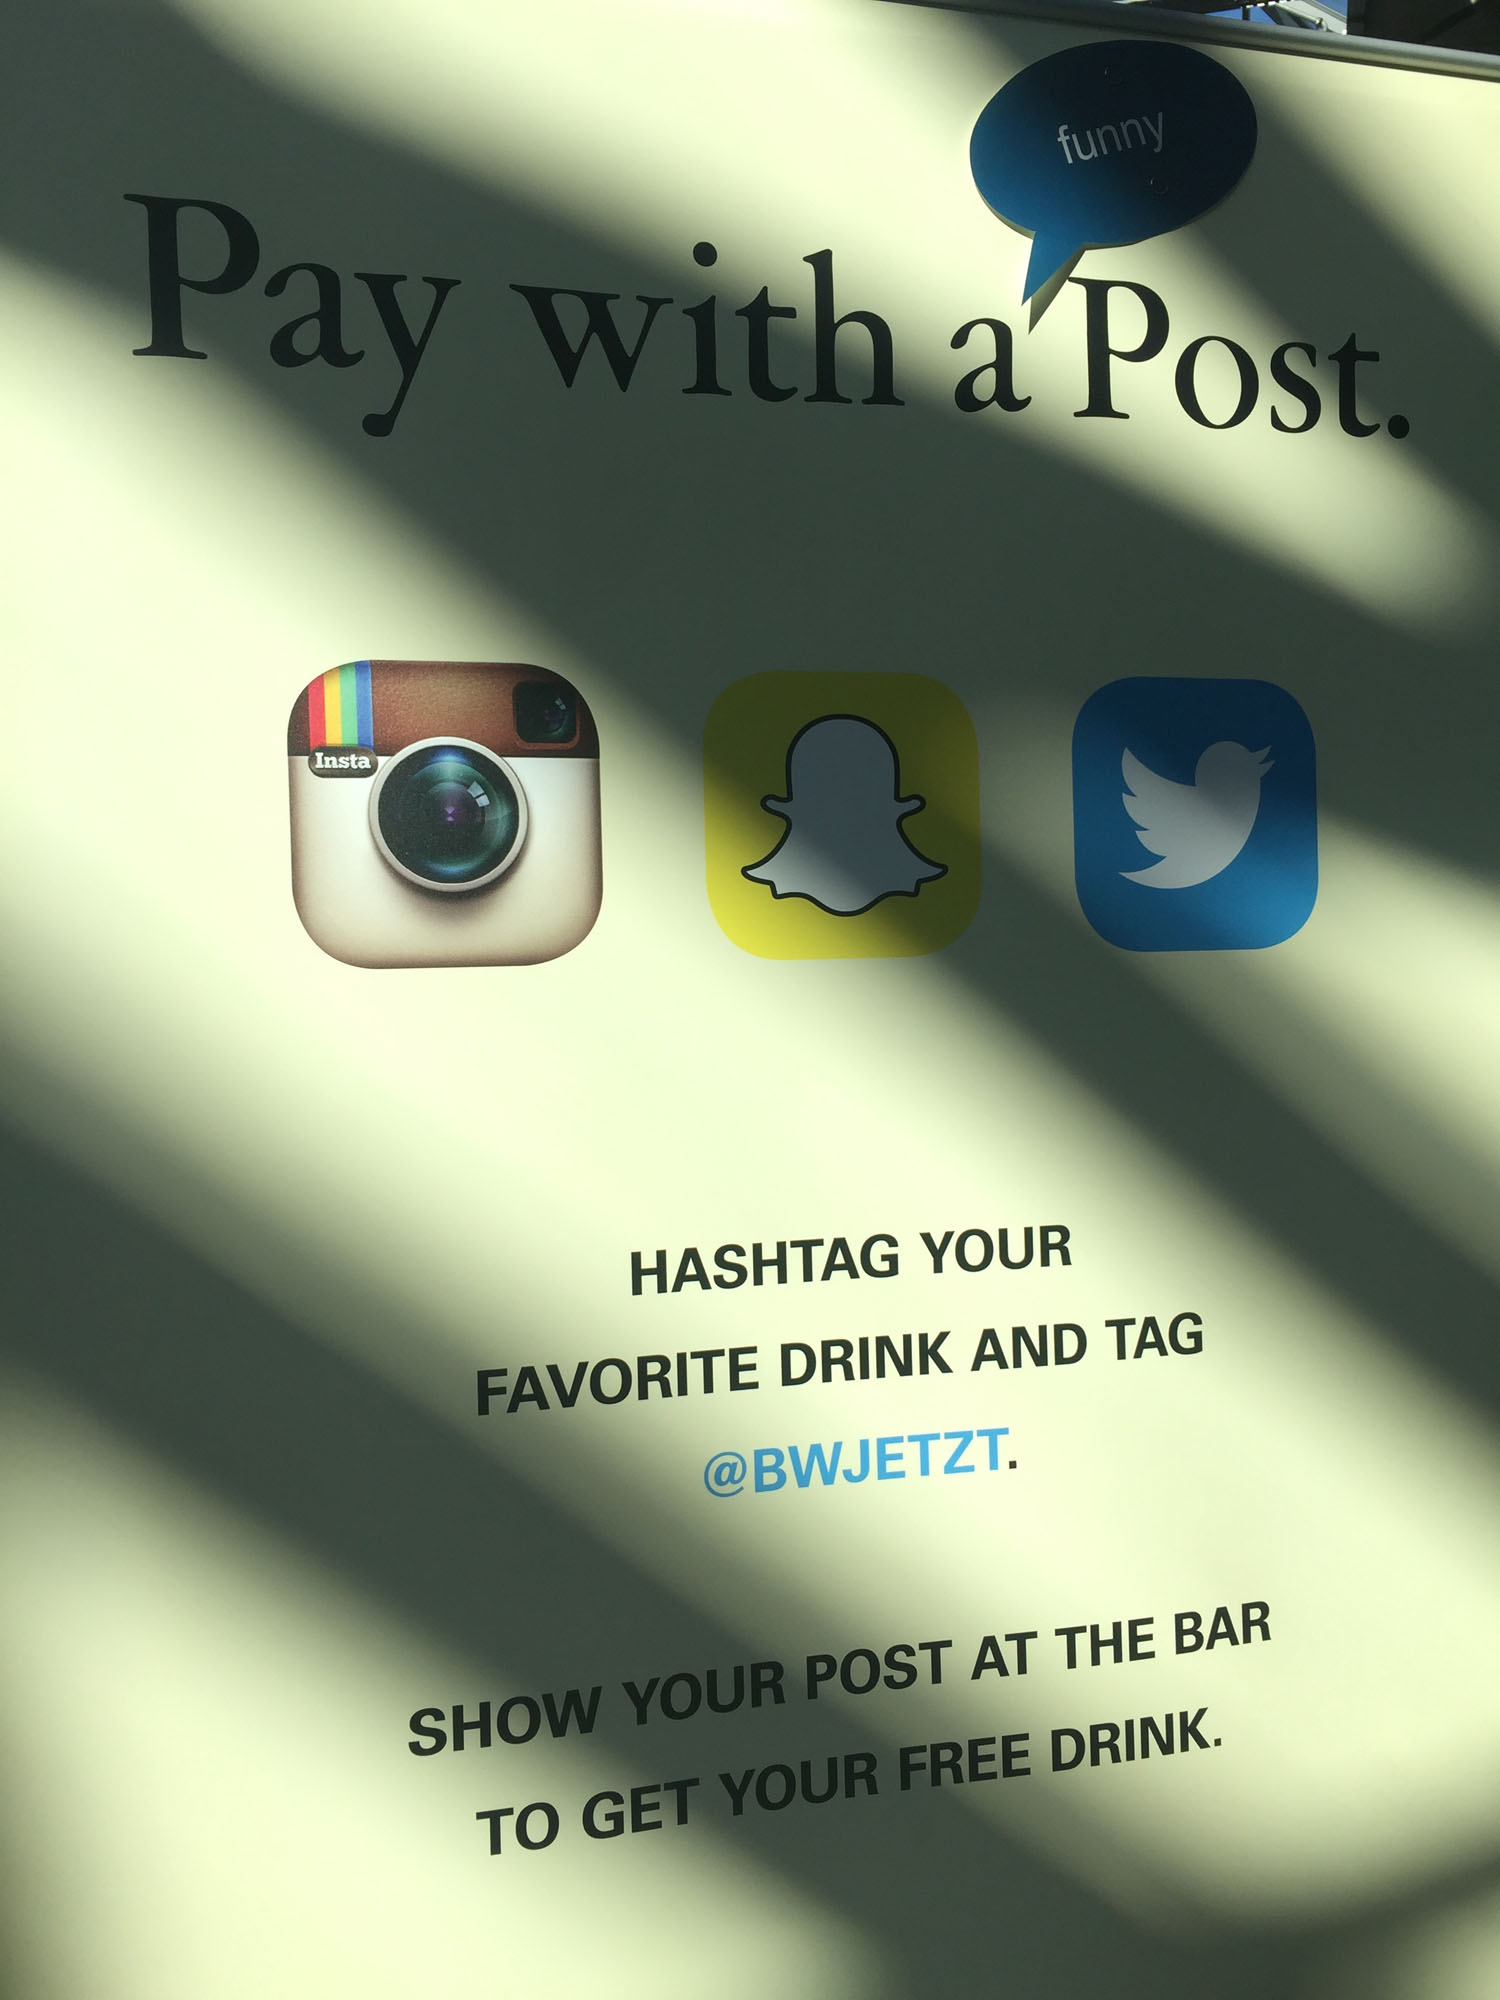 Pay with a Post